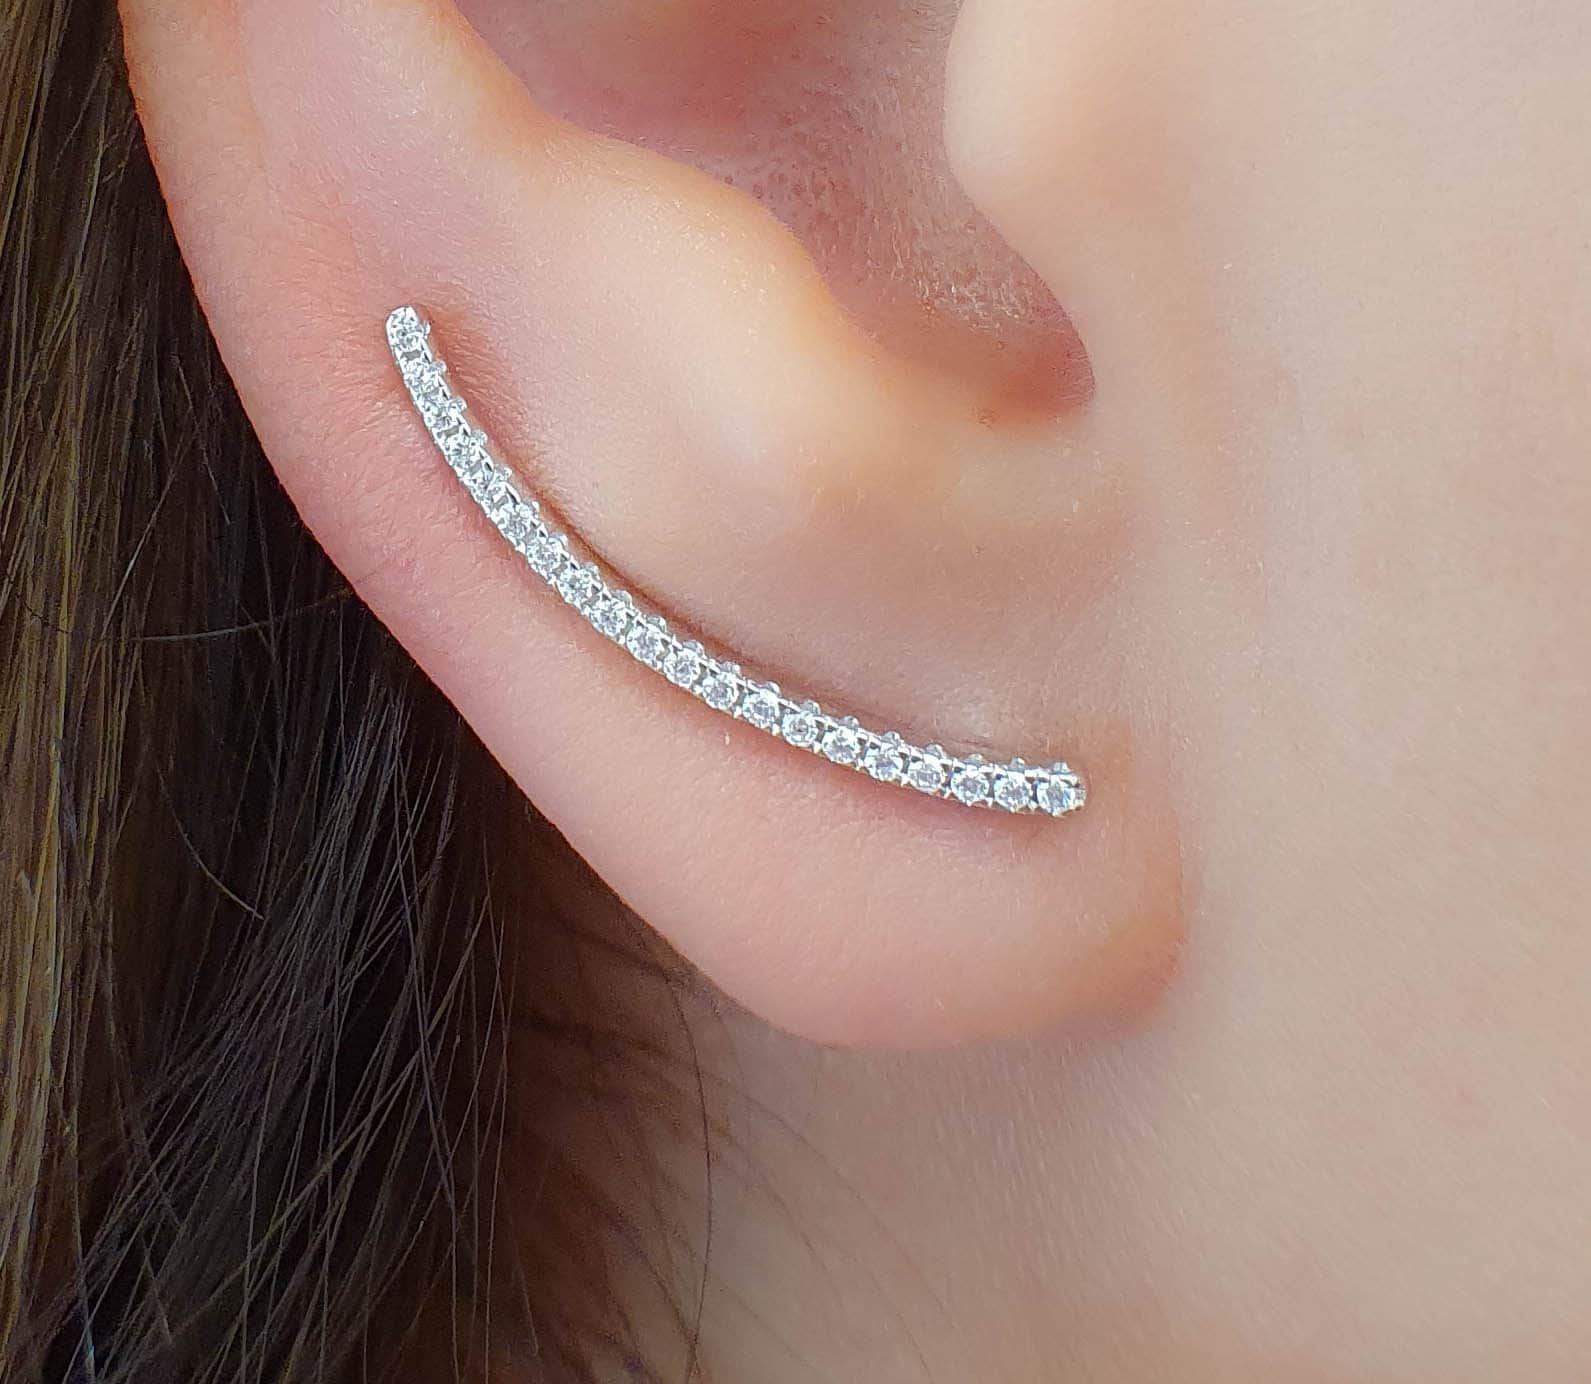 Shiny Silver Rhodium Plated CZ Pave Minimal Lines Earrings Ear Climber Crawler 